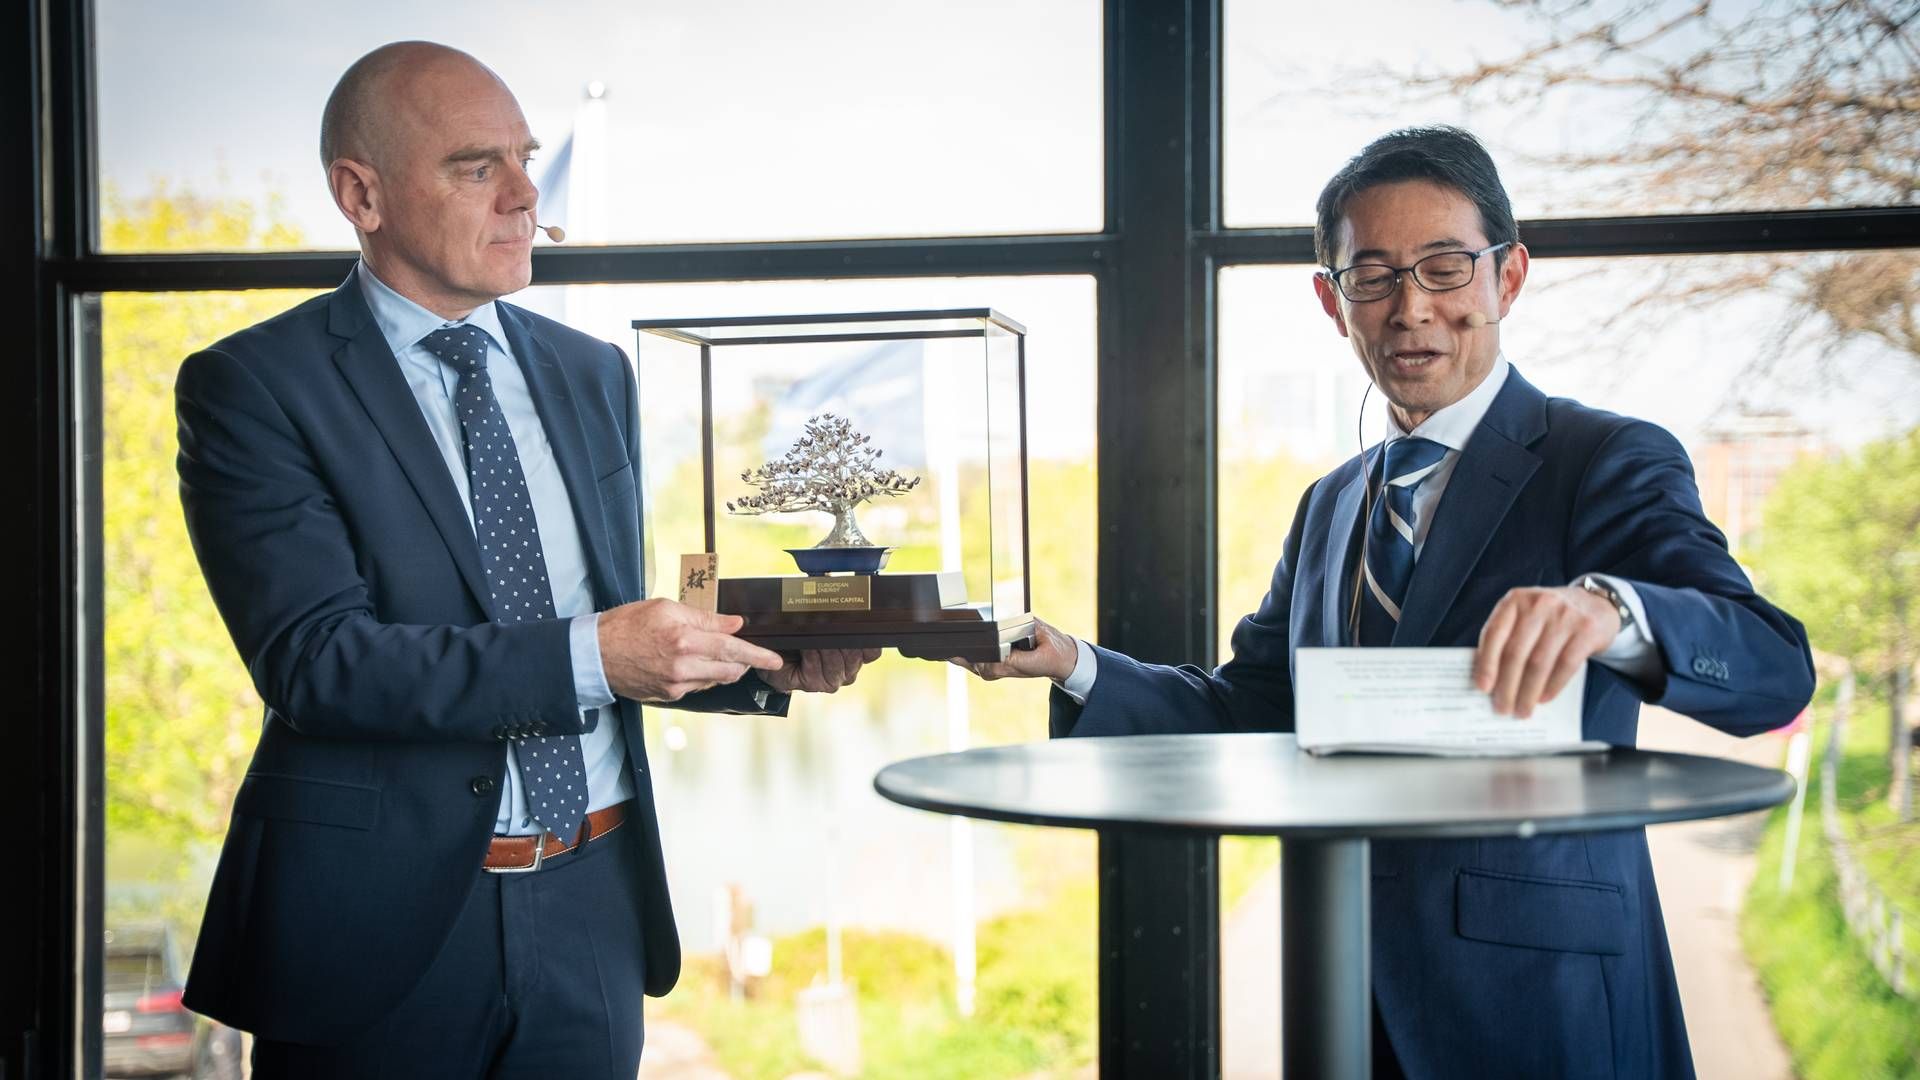 Takuji Naruse, Managing Executive Officer and Head of Environment & Energy Business Division at Mitsubishi HC Capital (right) and Knud Erik Andersen, CEO and founder of European Energy | Photo: Pr